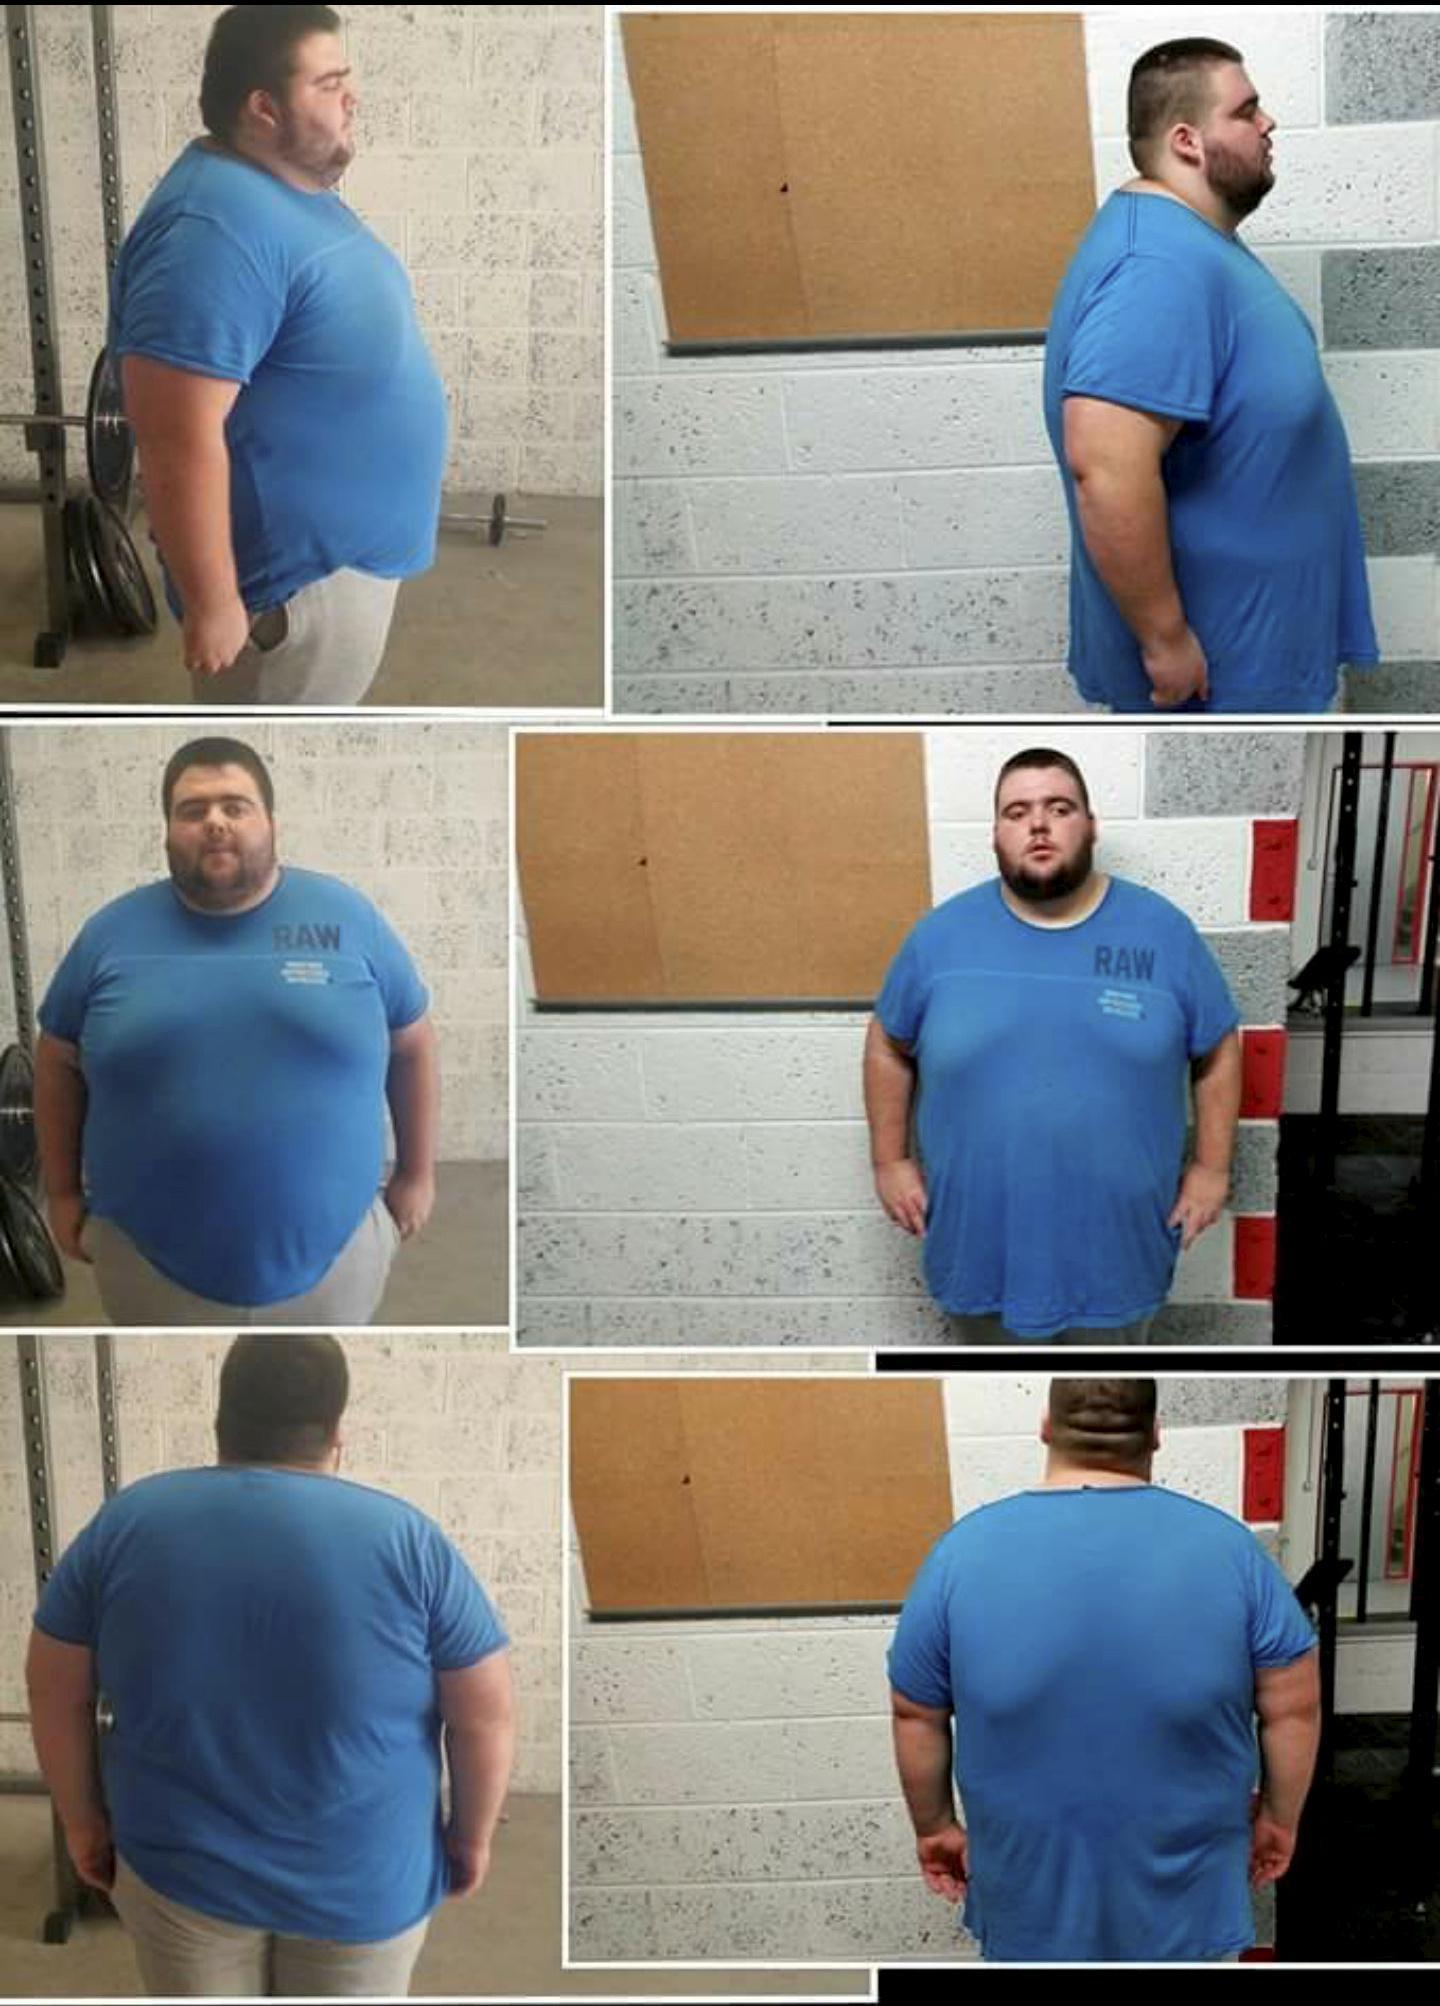 Dylan Condron, 21 wearing the 6XL T shirt before his weightloss. See Masons copy MN6XL: A superslimmer has lost an amazing 20 STONE after struggling to fit into a shirt that was SIX times extra-large. Dylan Condron, 21, left the scales groaning at a massive 33 stone after gorging on carbs when he failed to find work. But he shamed himself into his stunning weight loss when a neighbour bought him the XXXXXXL t-shirt back from holiday and it was too tight. He switched to a high-protein diet combined with a gruelling "caveman" gym programme and has dropped to a healthy 13 stone in two years.